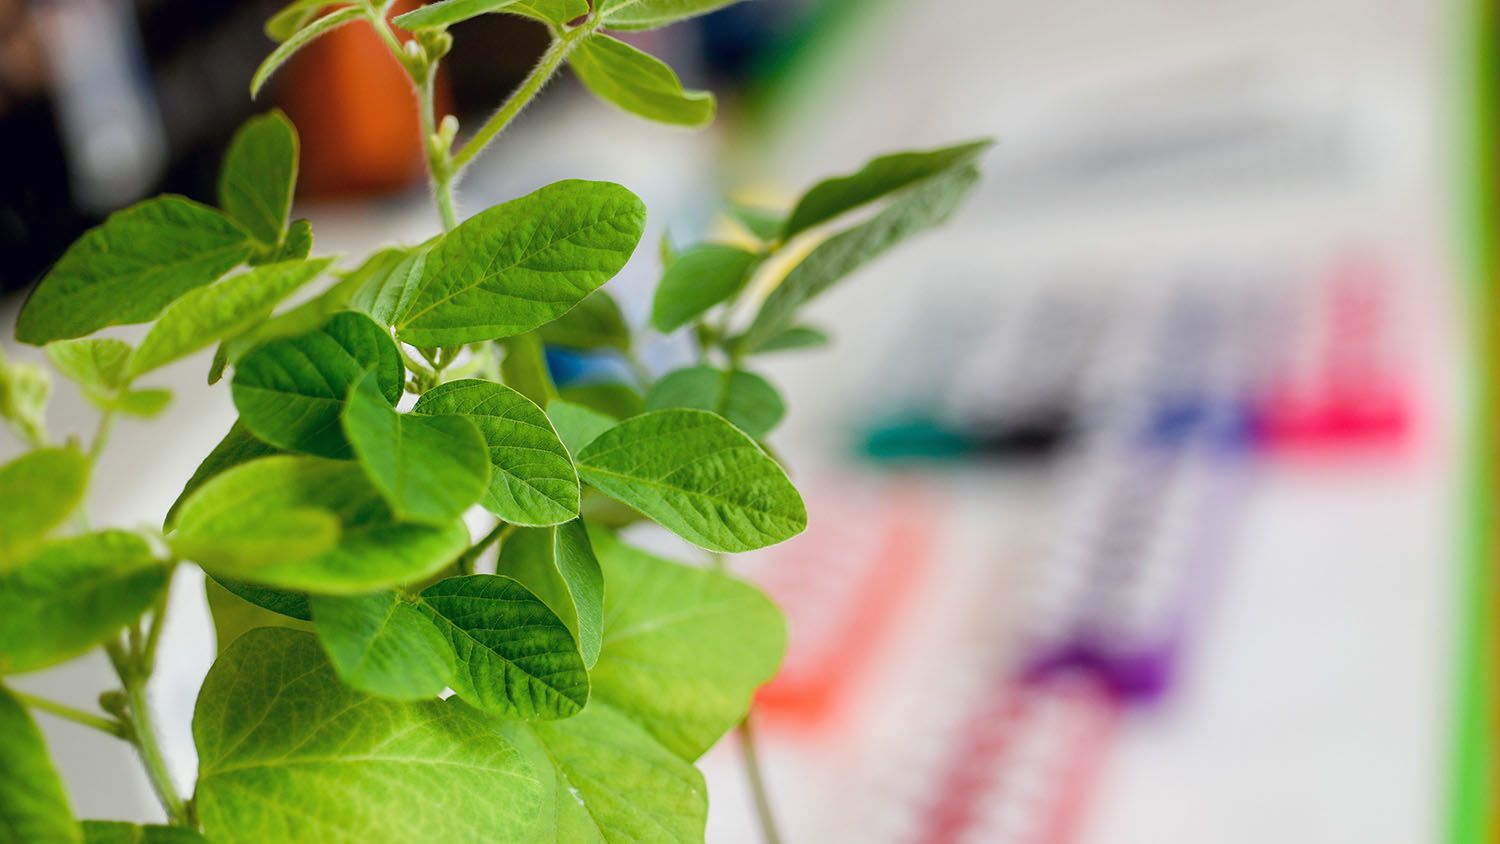 Soybean plants in a laboratory with colorful tubes in the background.